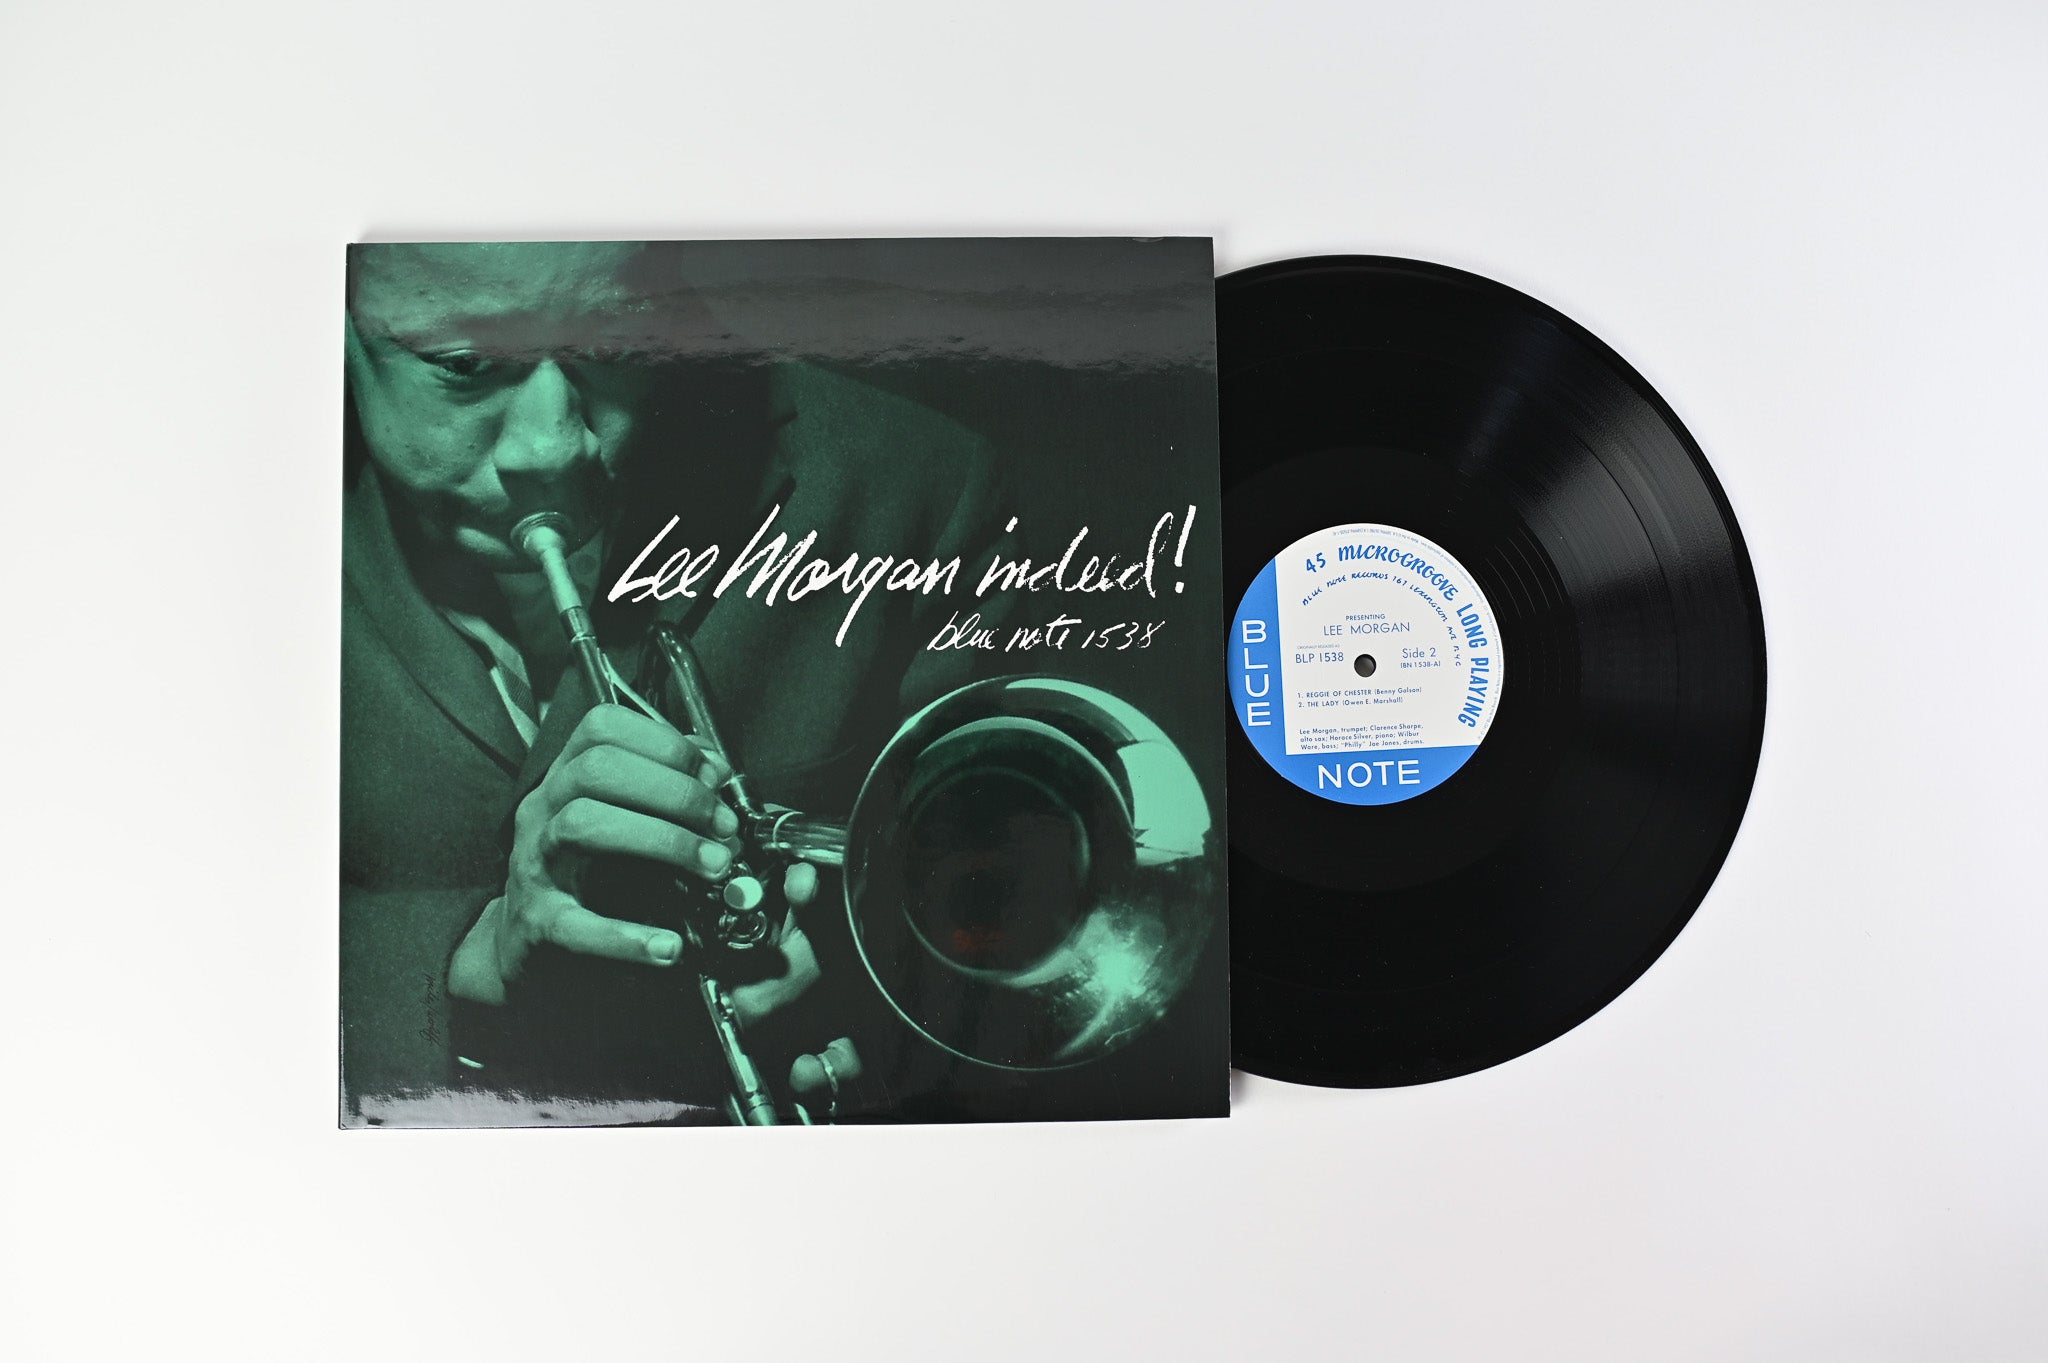 Lee Morgan - Indeed! on Blue Note Music Matter Ltd Reissue 45 RPM